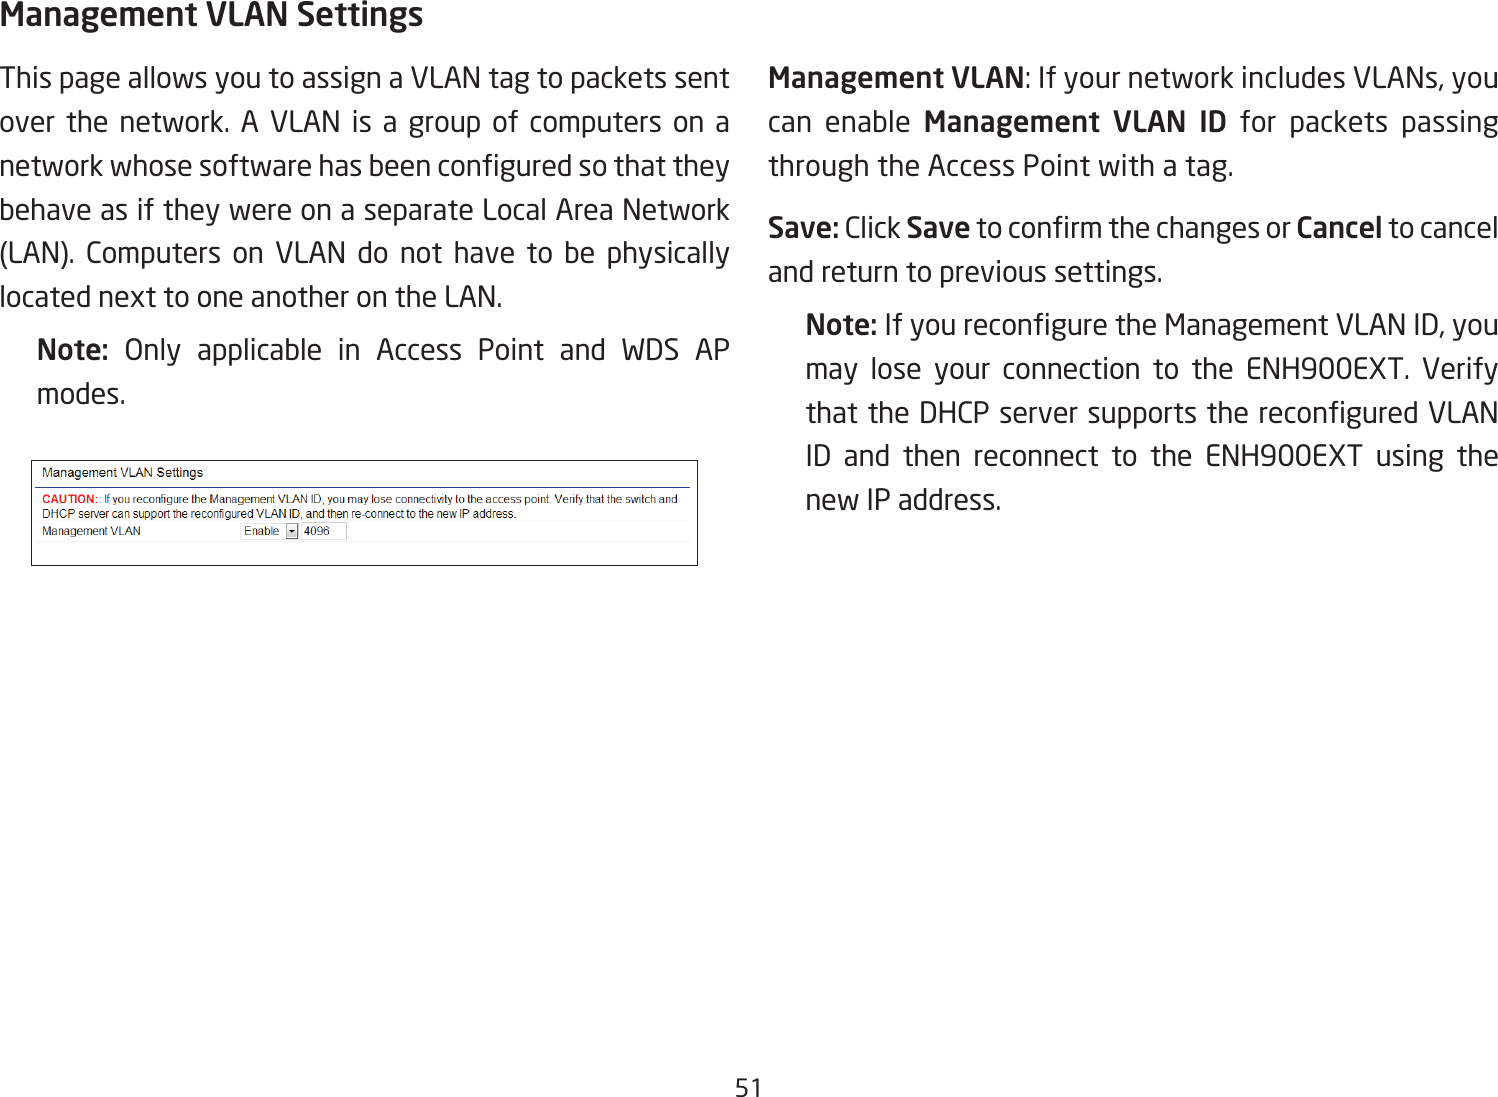 51Management VLAN SettingsThis page allows you to assign a VLAN tag to packets sent over the network. A VLAN is a group of computers on a networkwhosesoftwarehasbeenconguredsothattheybehave as if they were on a separate Local Area Network (LAN). Computers on VLAN do not have to be physically located next to one another on the LAN.Note:  Only applicable in Access Point and WDS AP modes.     Management VLAN: If your network includes VLANs, you can enable Management  VLAN ID for packets passing through the Access Point with a tag. Save: Click SavetoconrmthechangesorCancel to cancel and return to previous settings.Note: IfyoureconguretheManagementVLANID,youmay lose your connection to the ENH900EXT. Verify thattheDHCPserversupportsthereconguredVLANID and then reconnect to the ENH900EXT using the new IP address. 